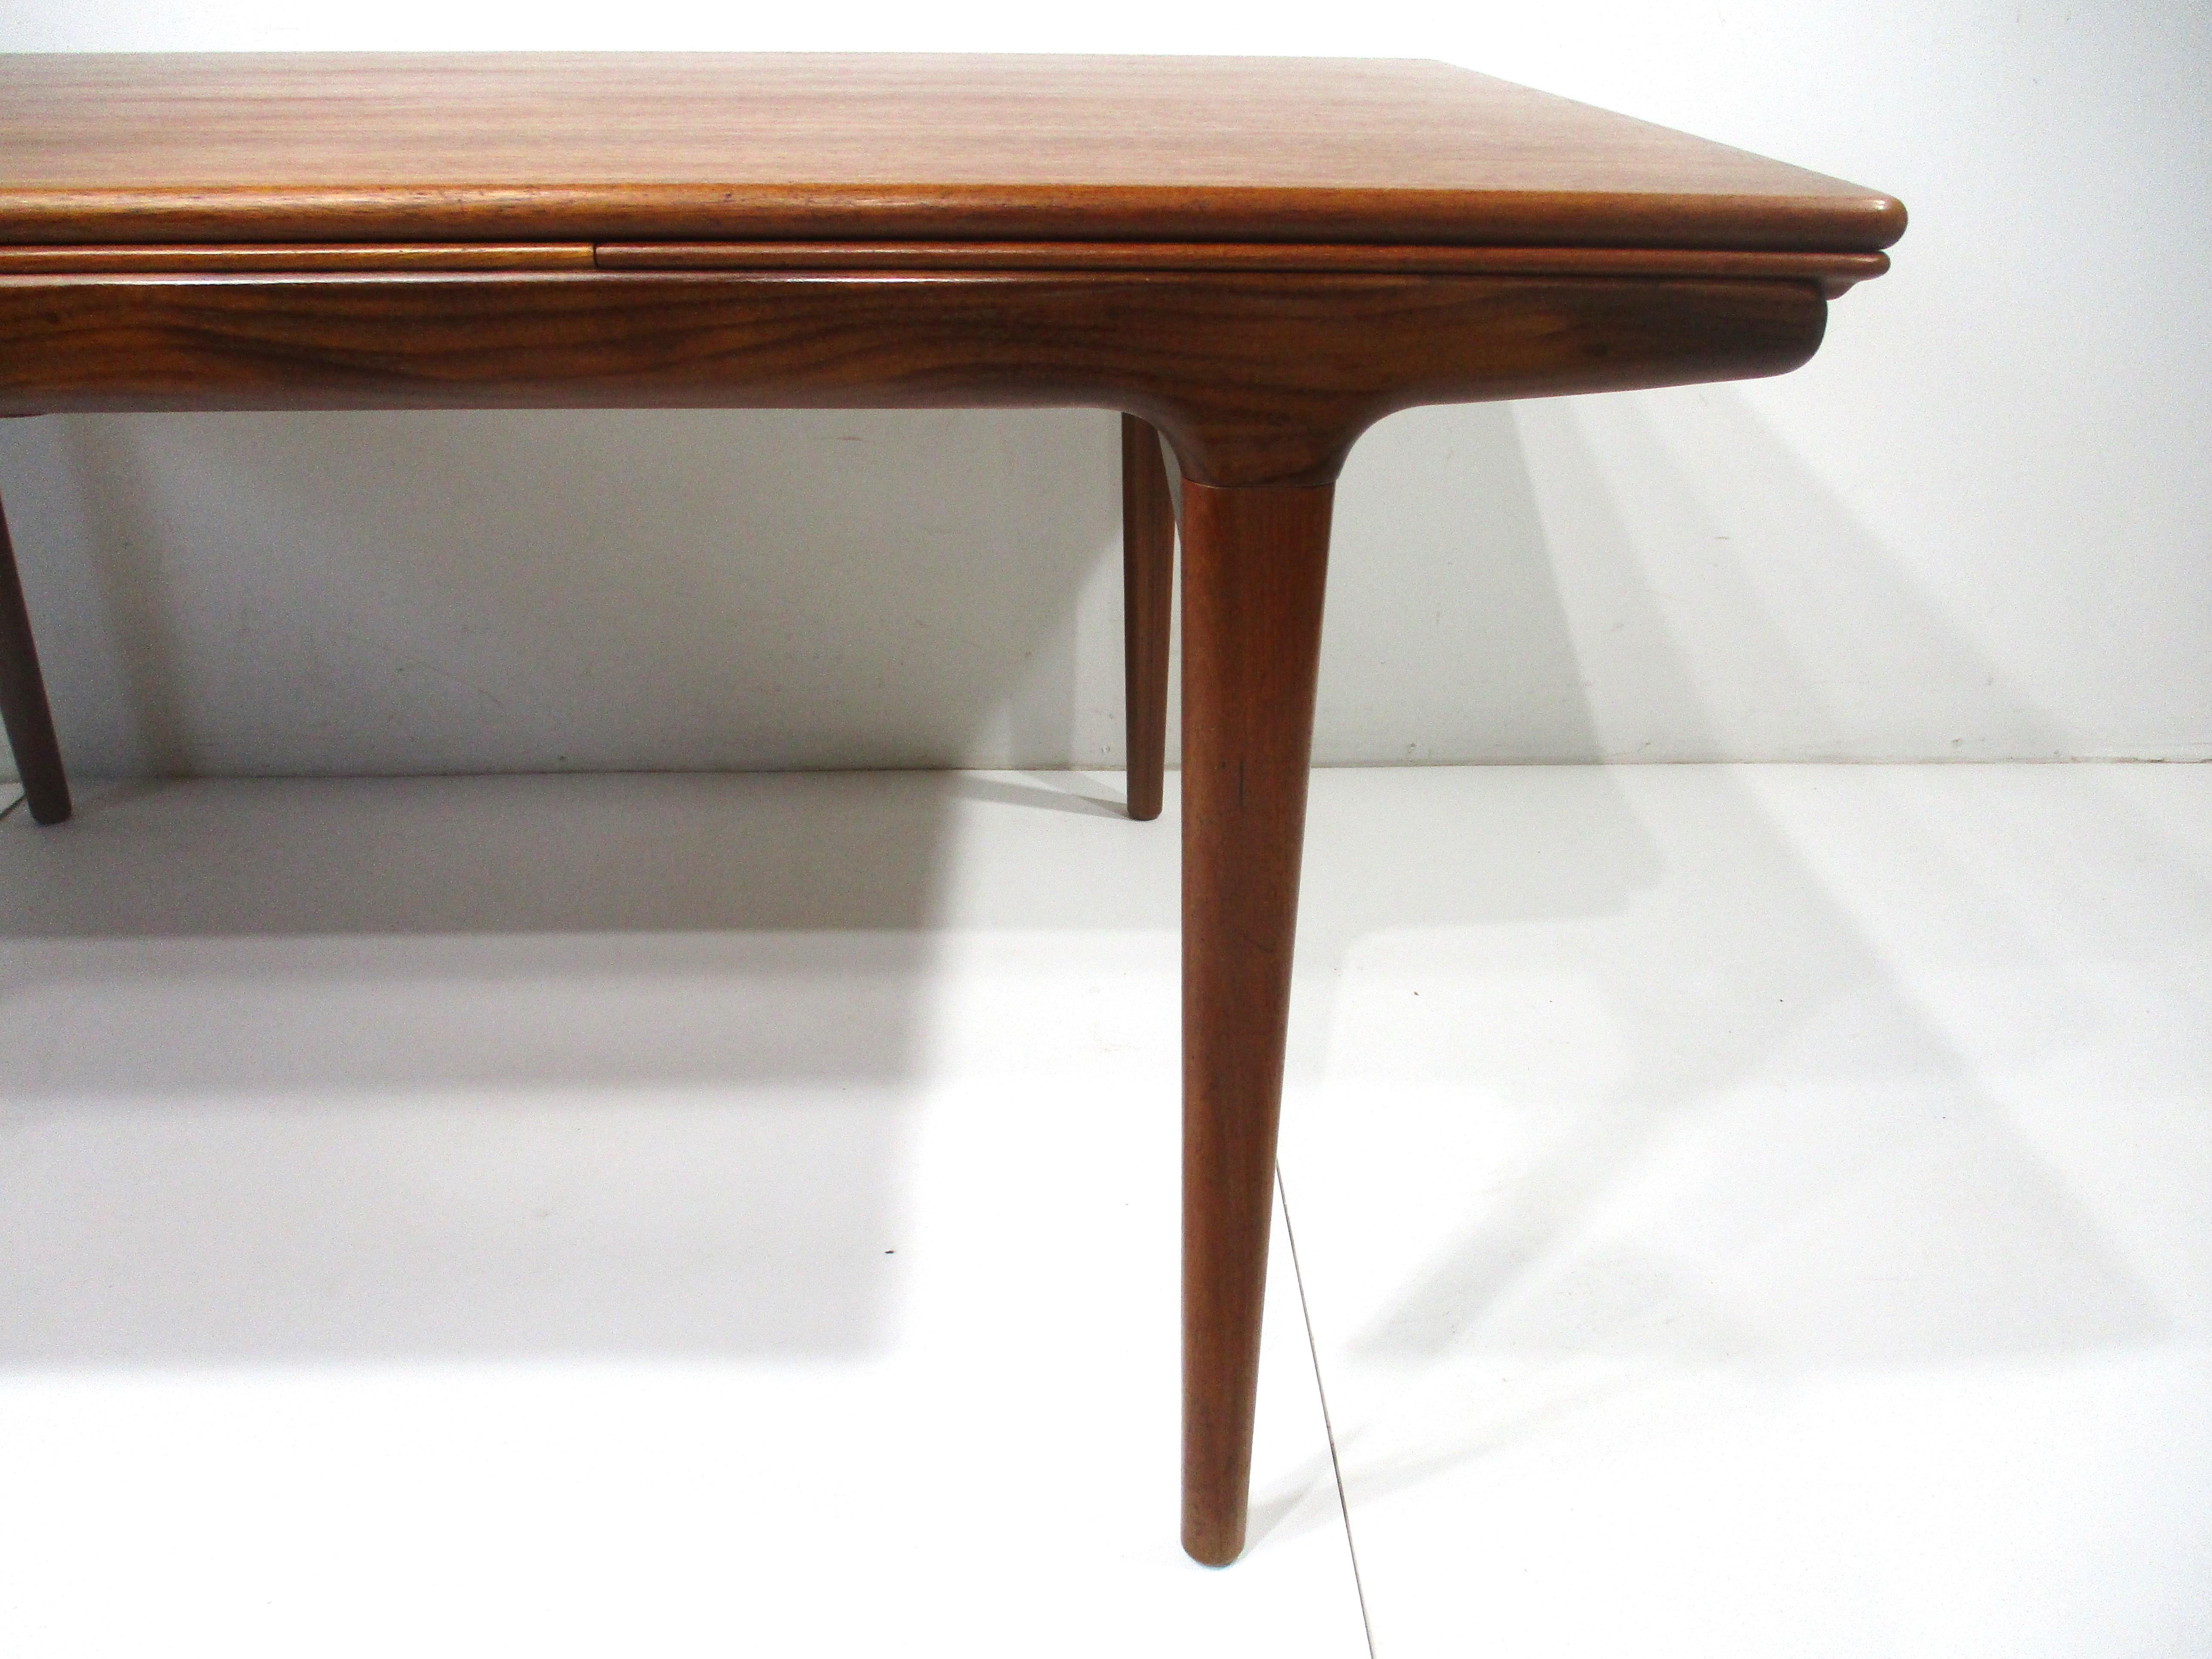 Teak Dining Table w/ Pullout Expandable Leaves by Niels Moller Denmark  In Good Condition For Sale In Cincinnati, OH